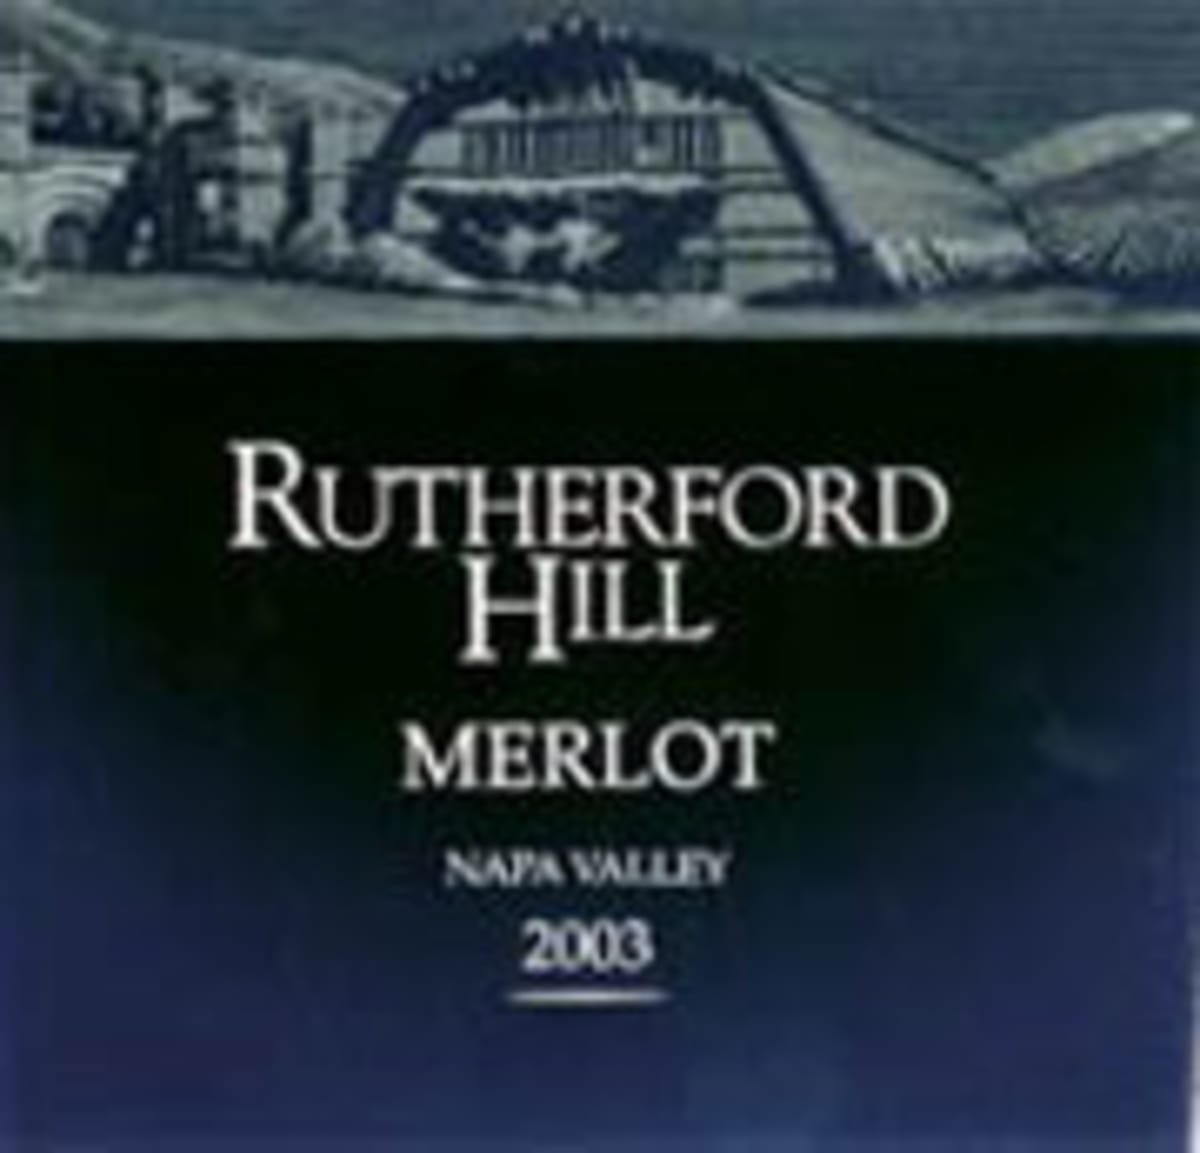 Rutherford Hill Merlot 2003 Front Label